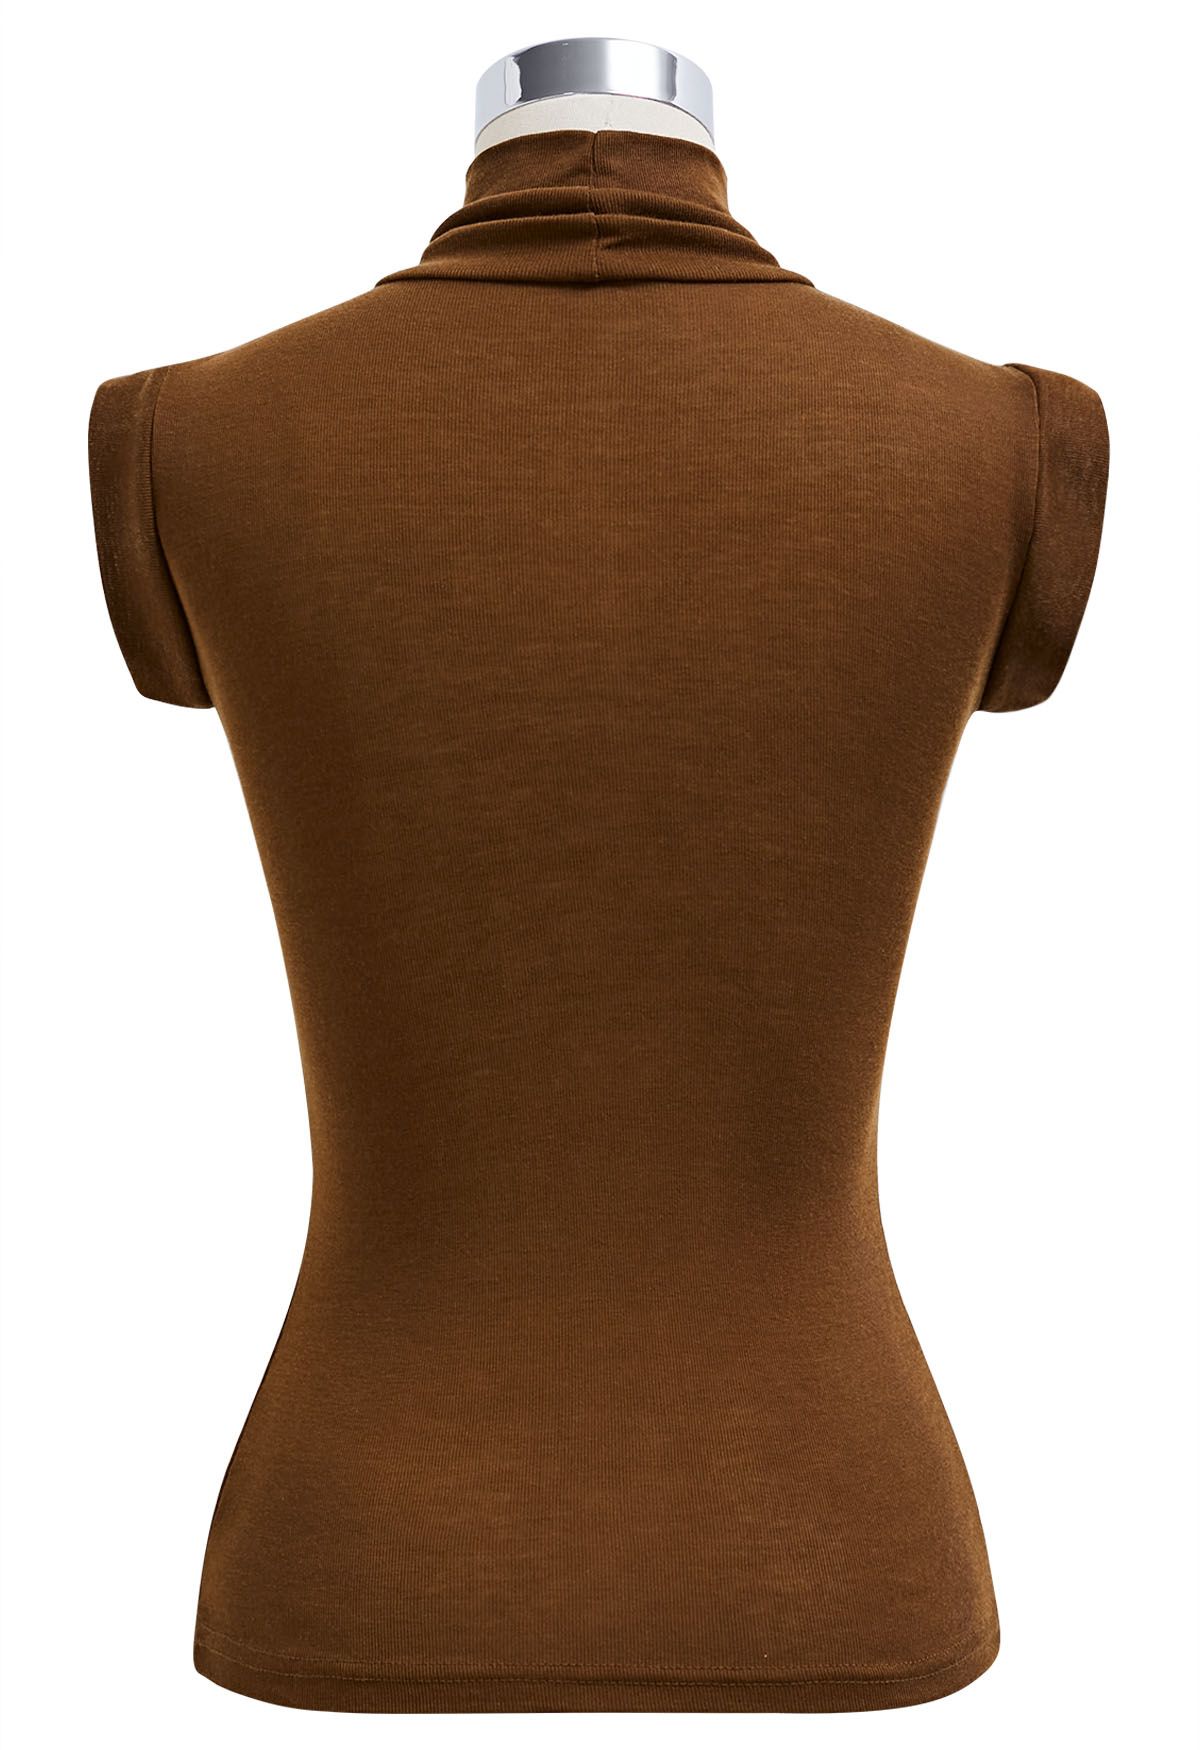 High Neck Sleeveless Slim Fit Top in Brown